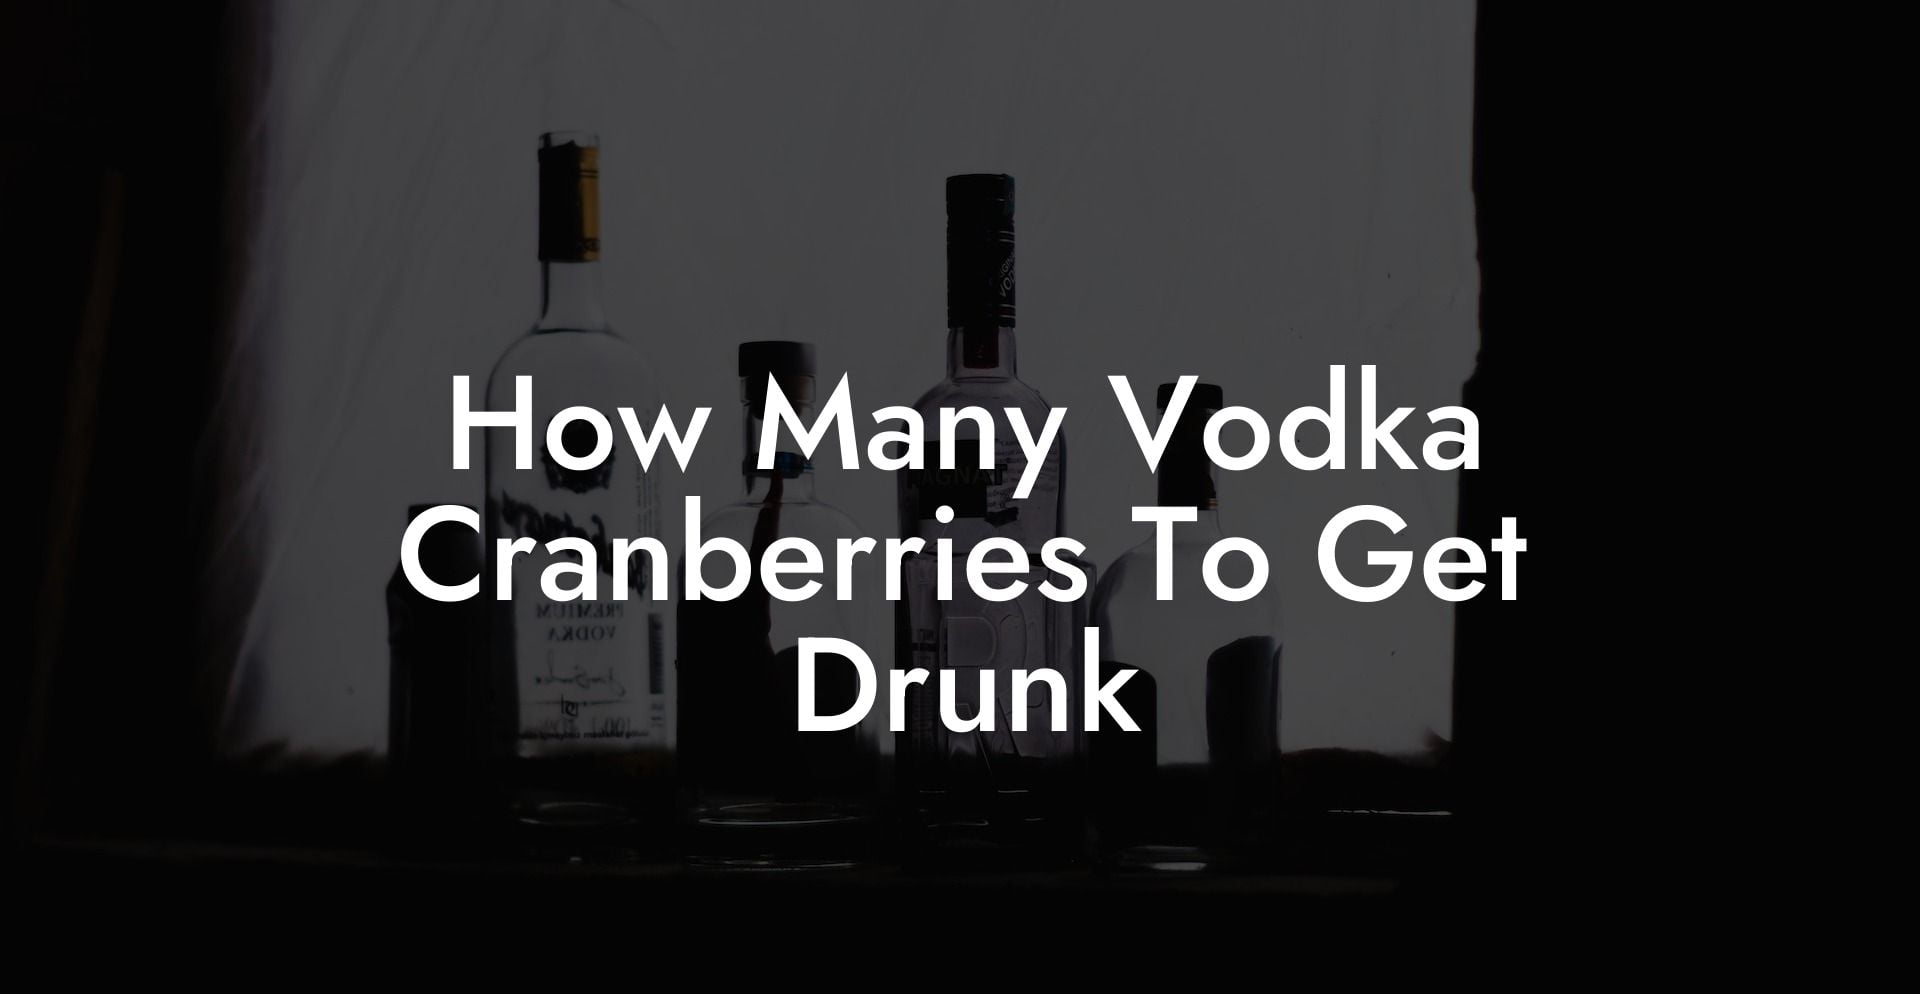 How Many Vodka Cranberries To Get Drunk